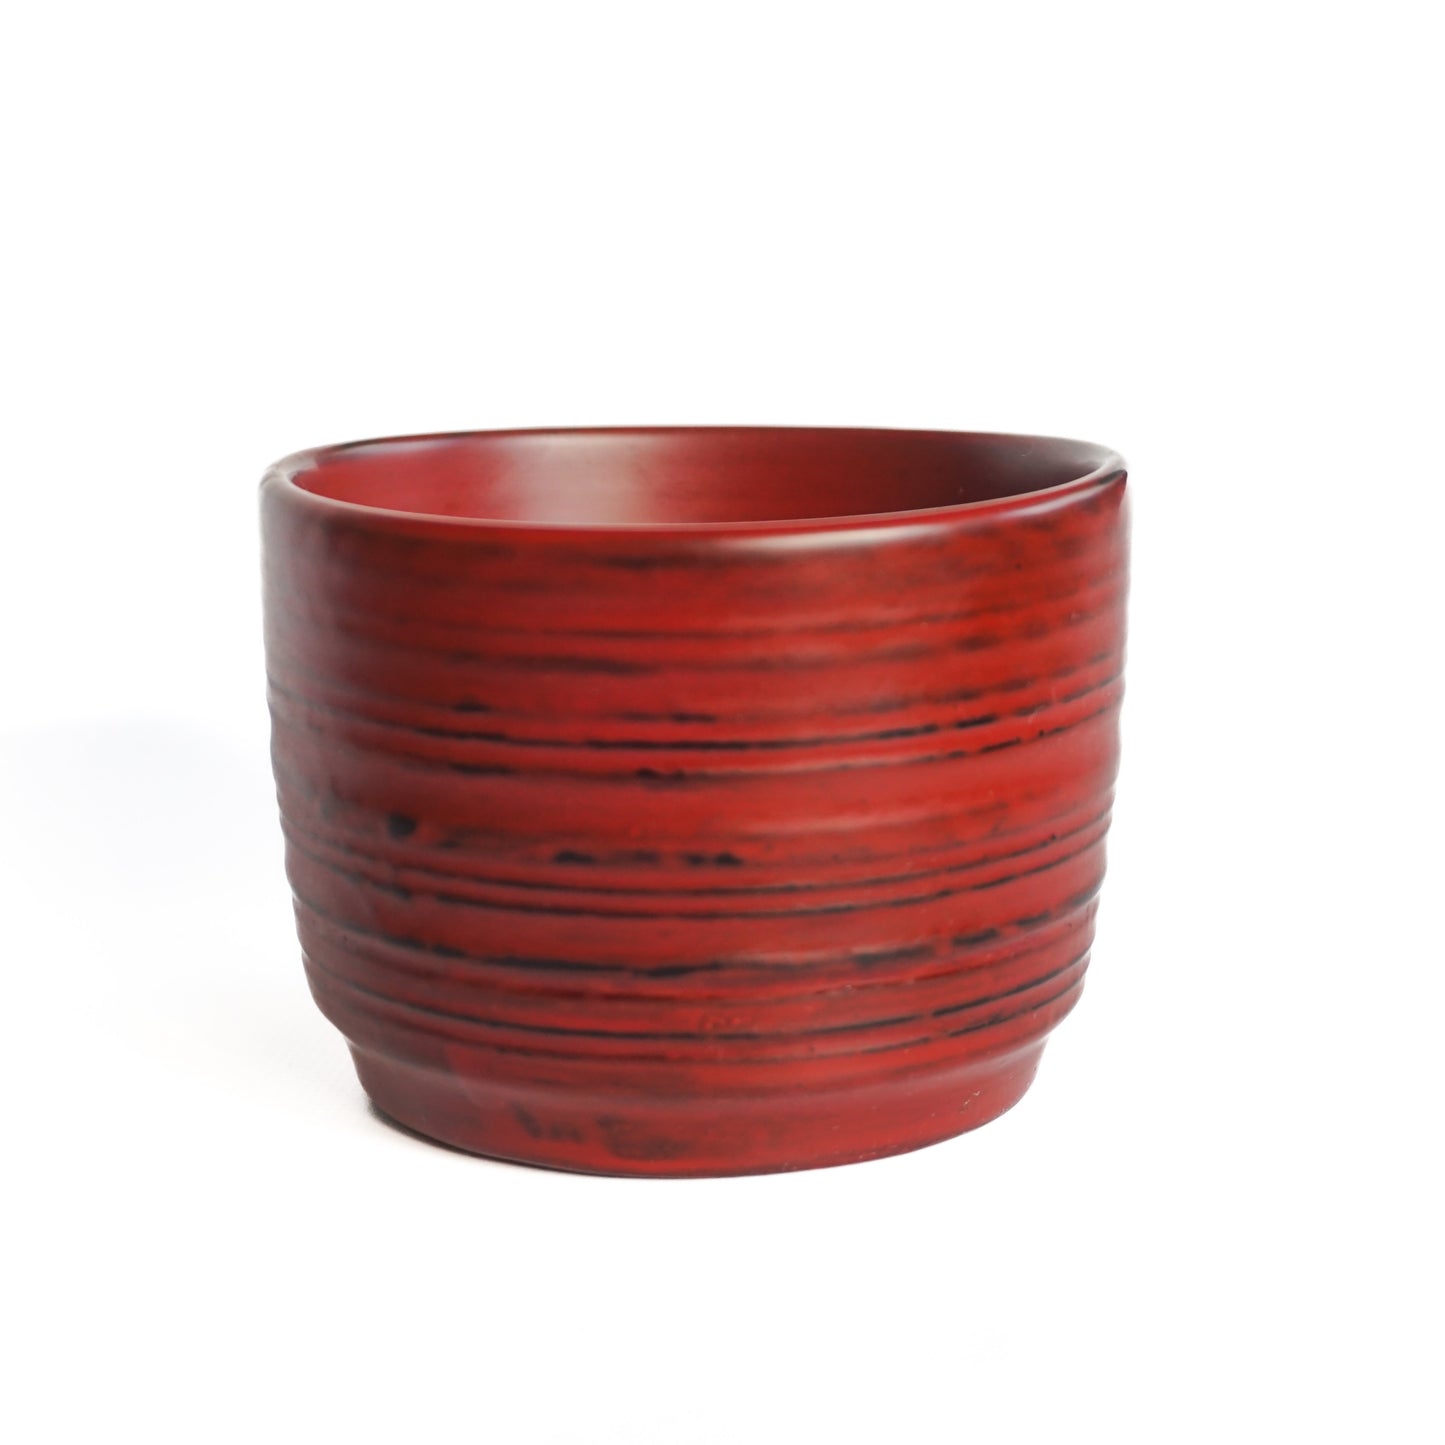 Textured Lacquered Cup for Soba - Handcrafted in Japan by Lacquer Master Yagi